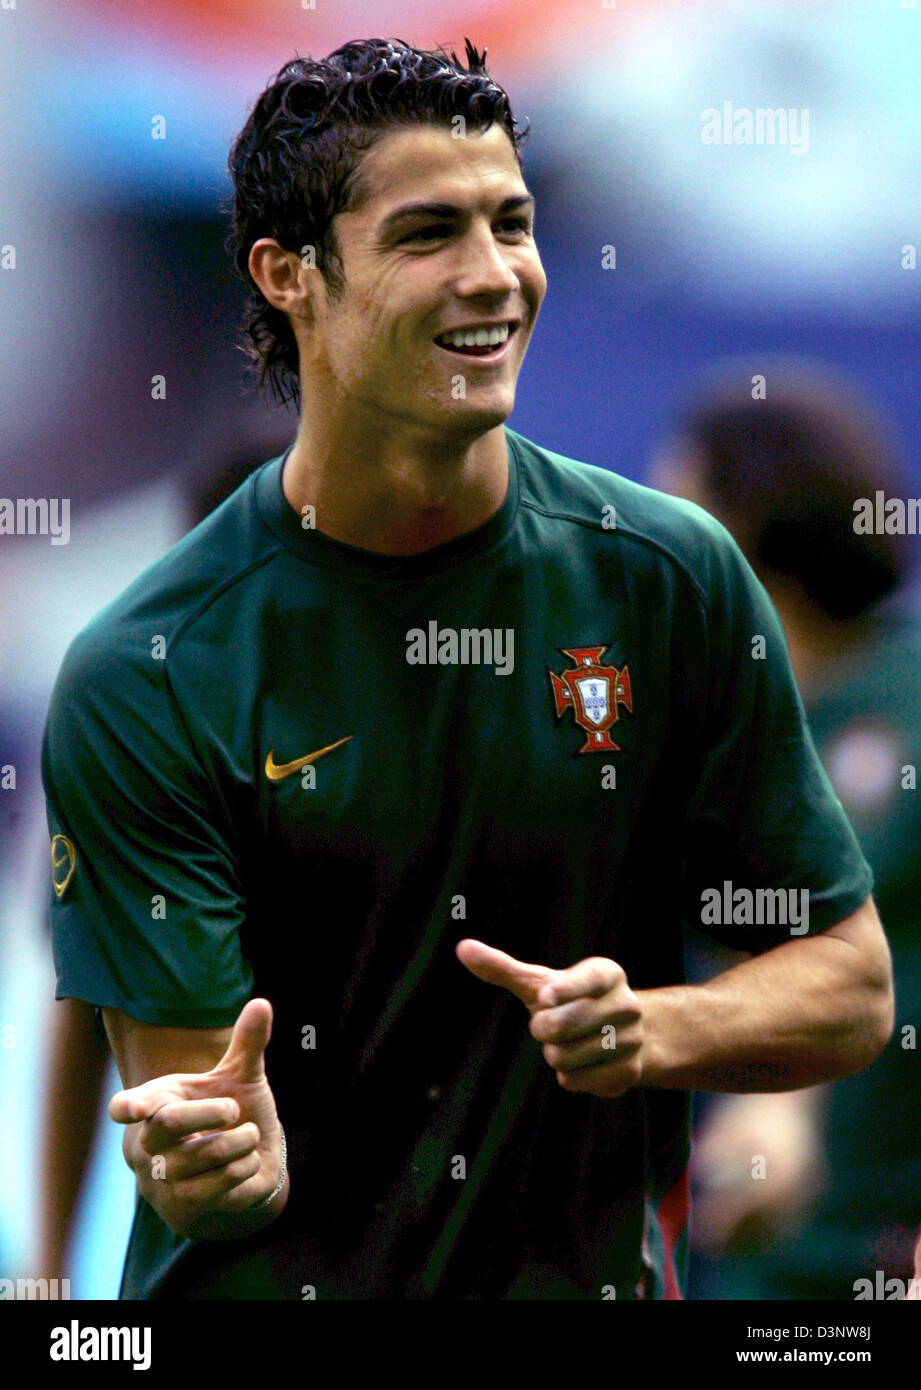 Portugal's Cristiano Ronaldo shown during a training session at the FIFA World Cup Stadium in Munich, Germany, Tuesday, 4 July 2006. Portugal will play against France in the semi final of the FIFA World Cup on Wednesday in Munich. Photo: MATTHIAS SCHRADER +++ Mobile Services OUT +++ Please refer to FIFA's Terms and Conditions. Stock Photo